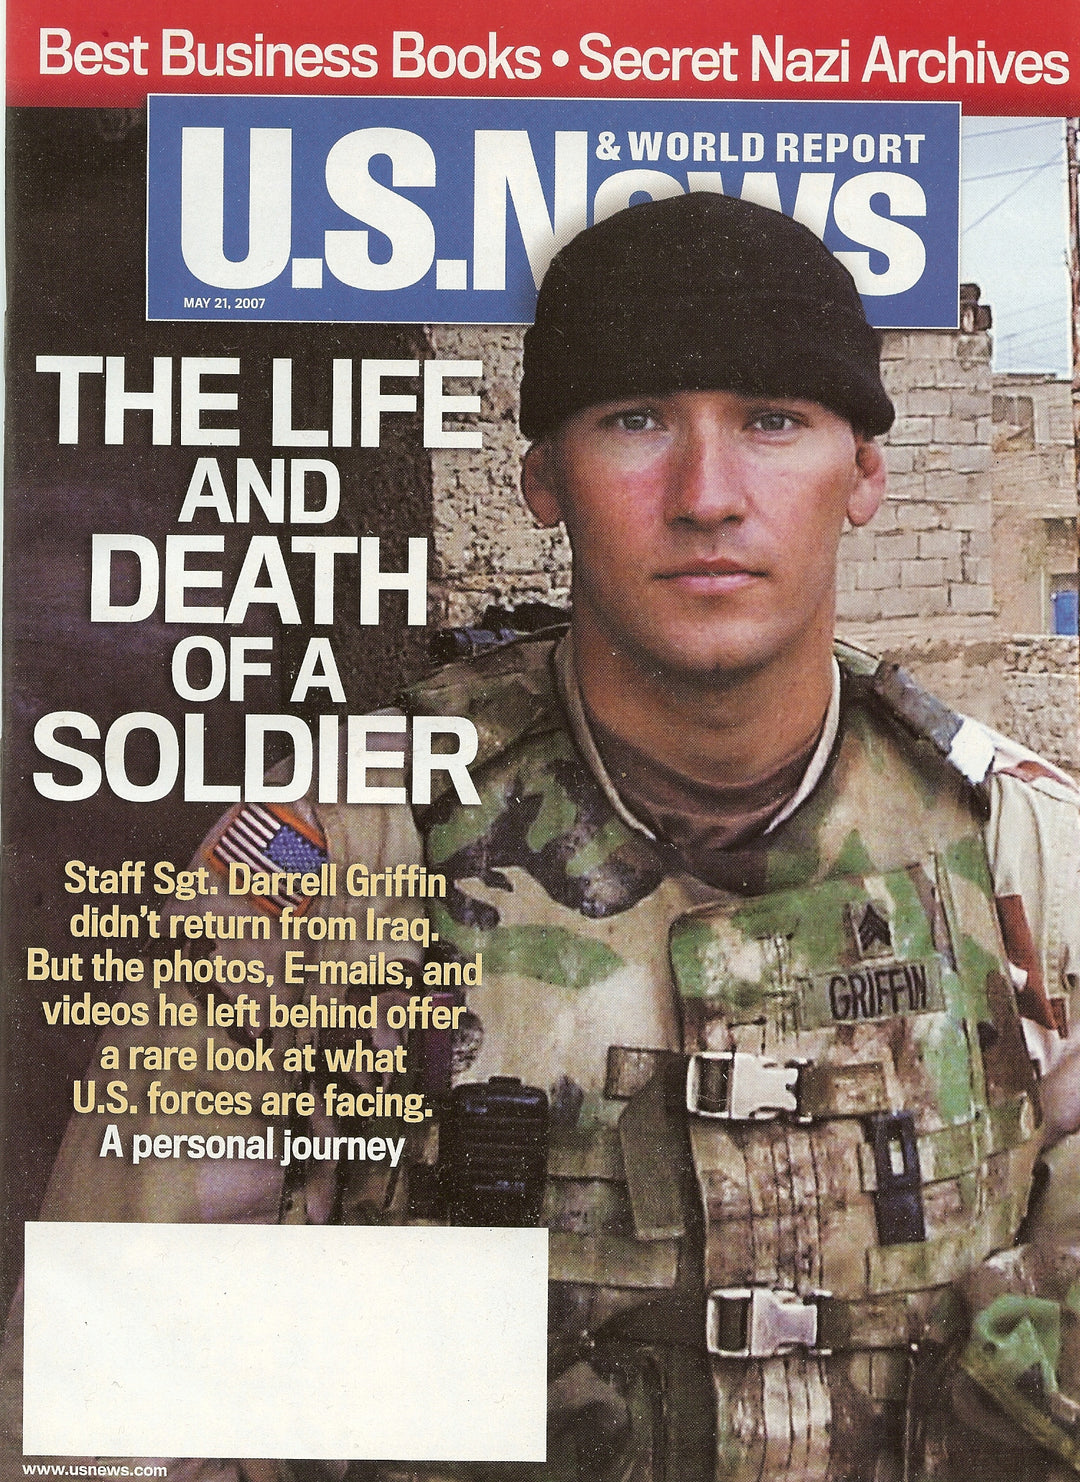 The Life and Death of a Soldier